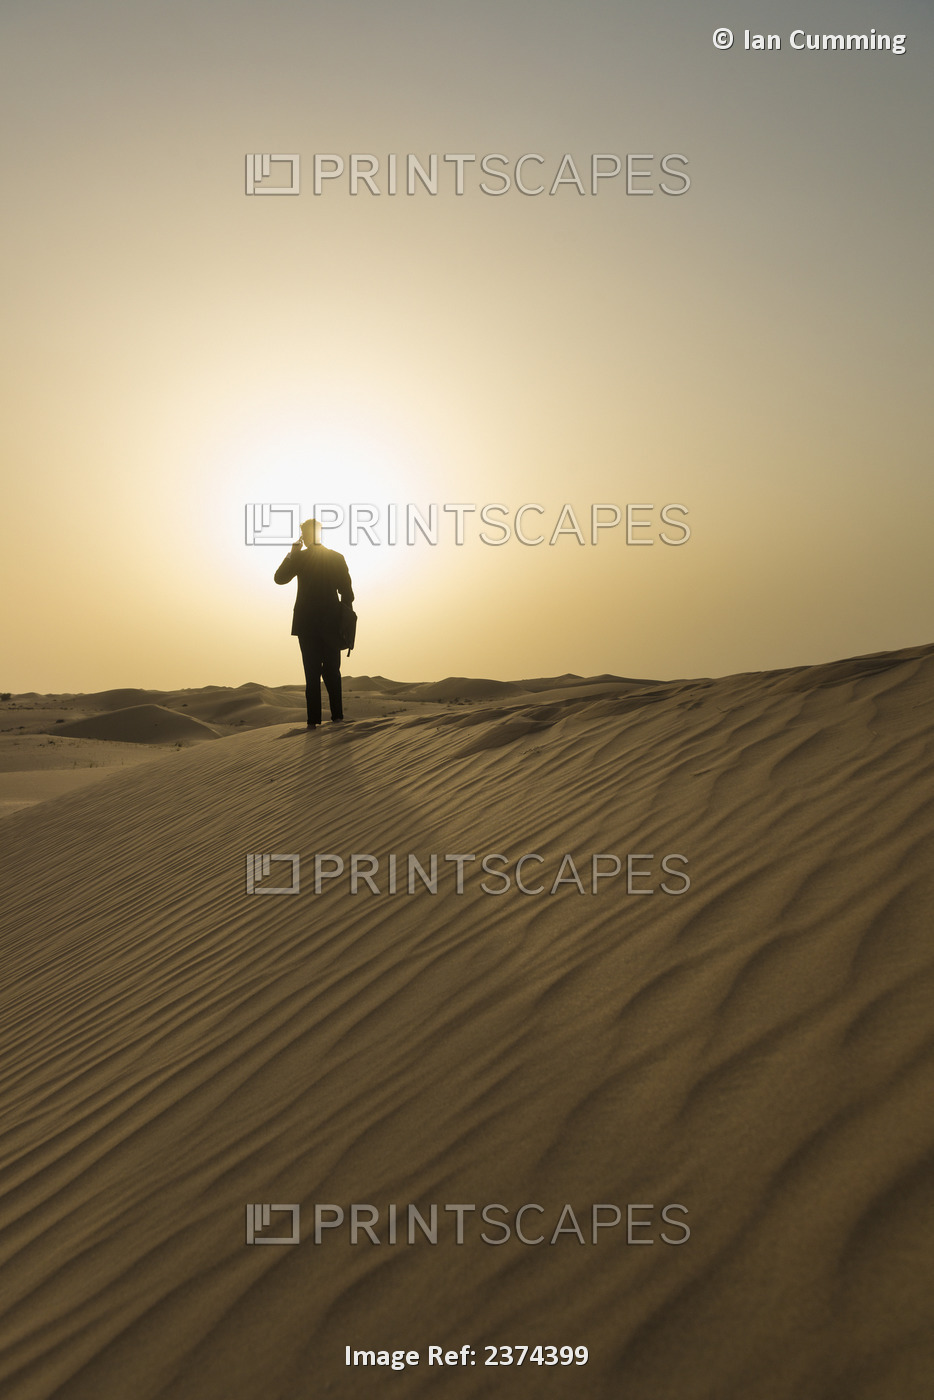 Man In Smart Suit Making Phone Call On Top Of Sand Dune At Dusk; Dubai, United ...